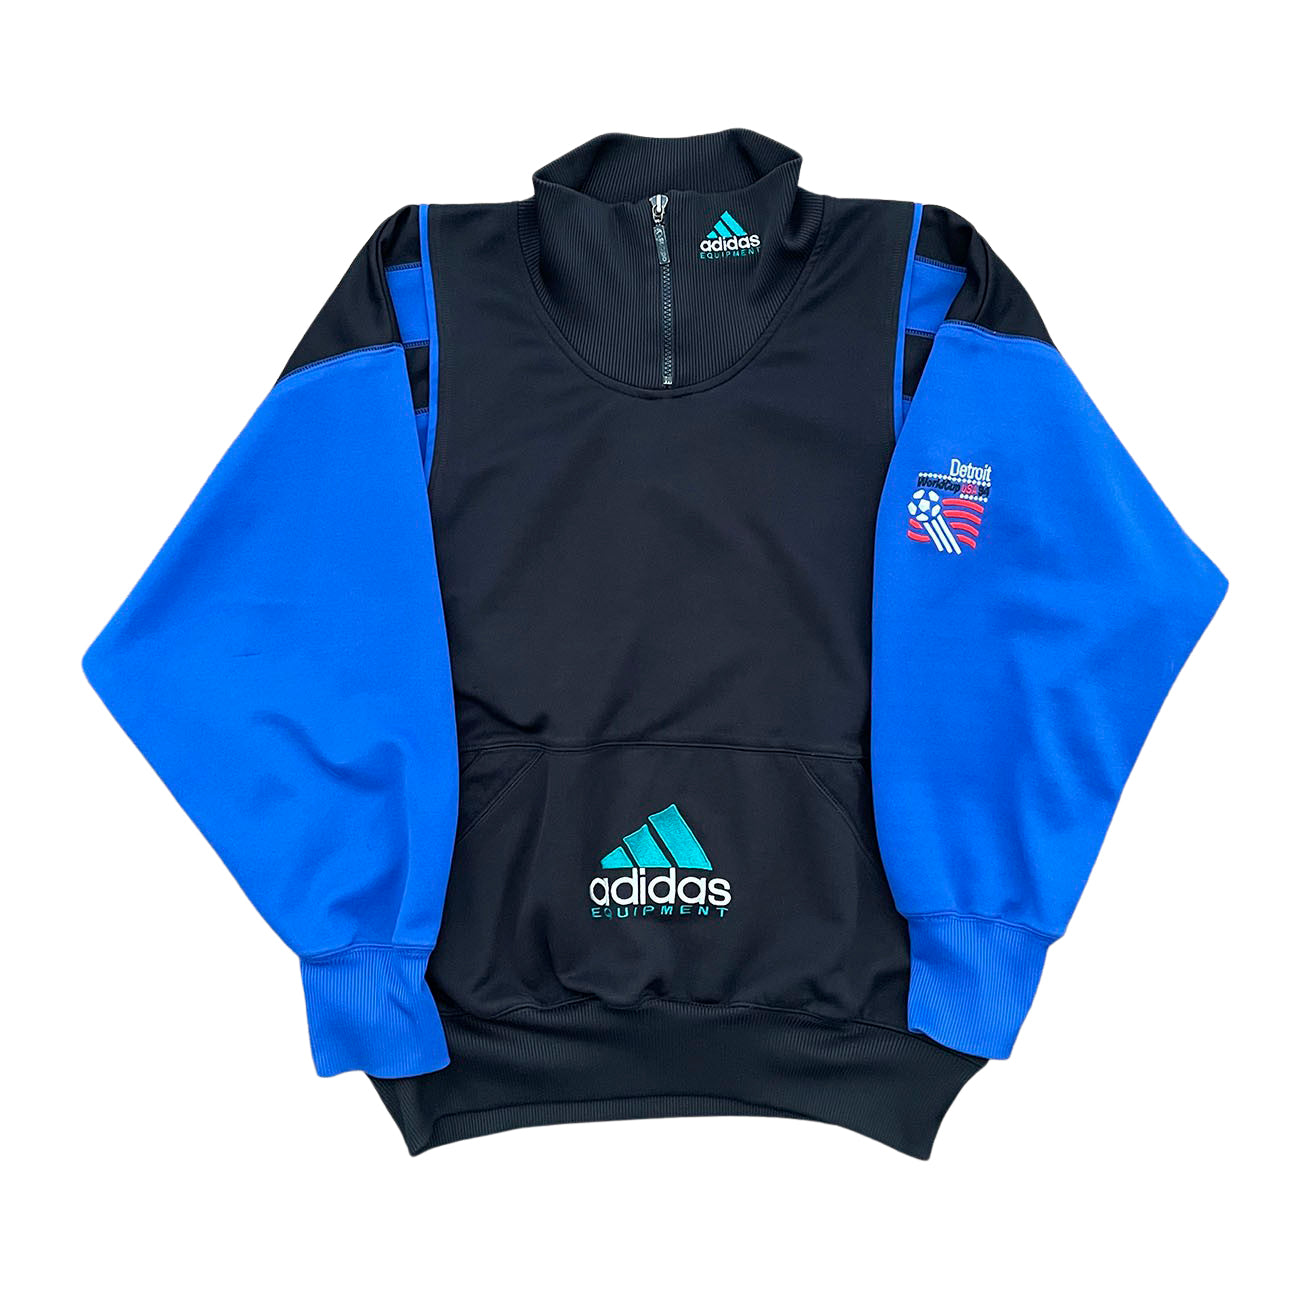 1994 World Cup Adidas Equipment Detroit Pullover - L